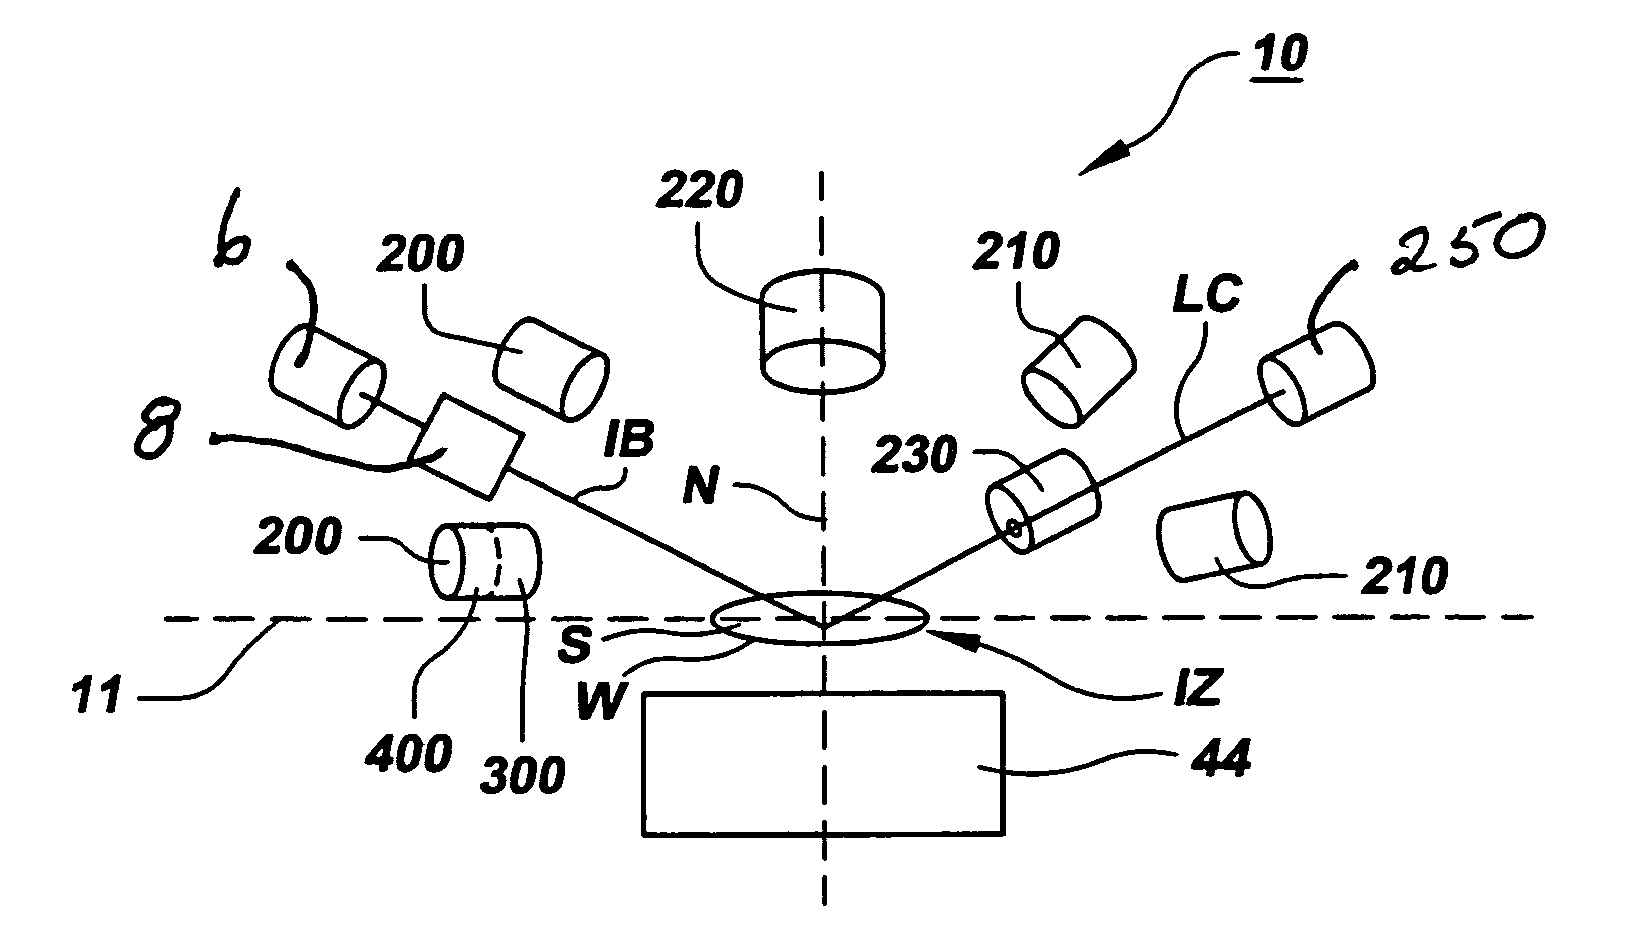 Threshold determination in an inspection system